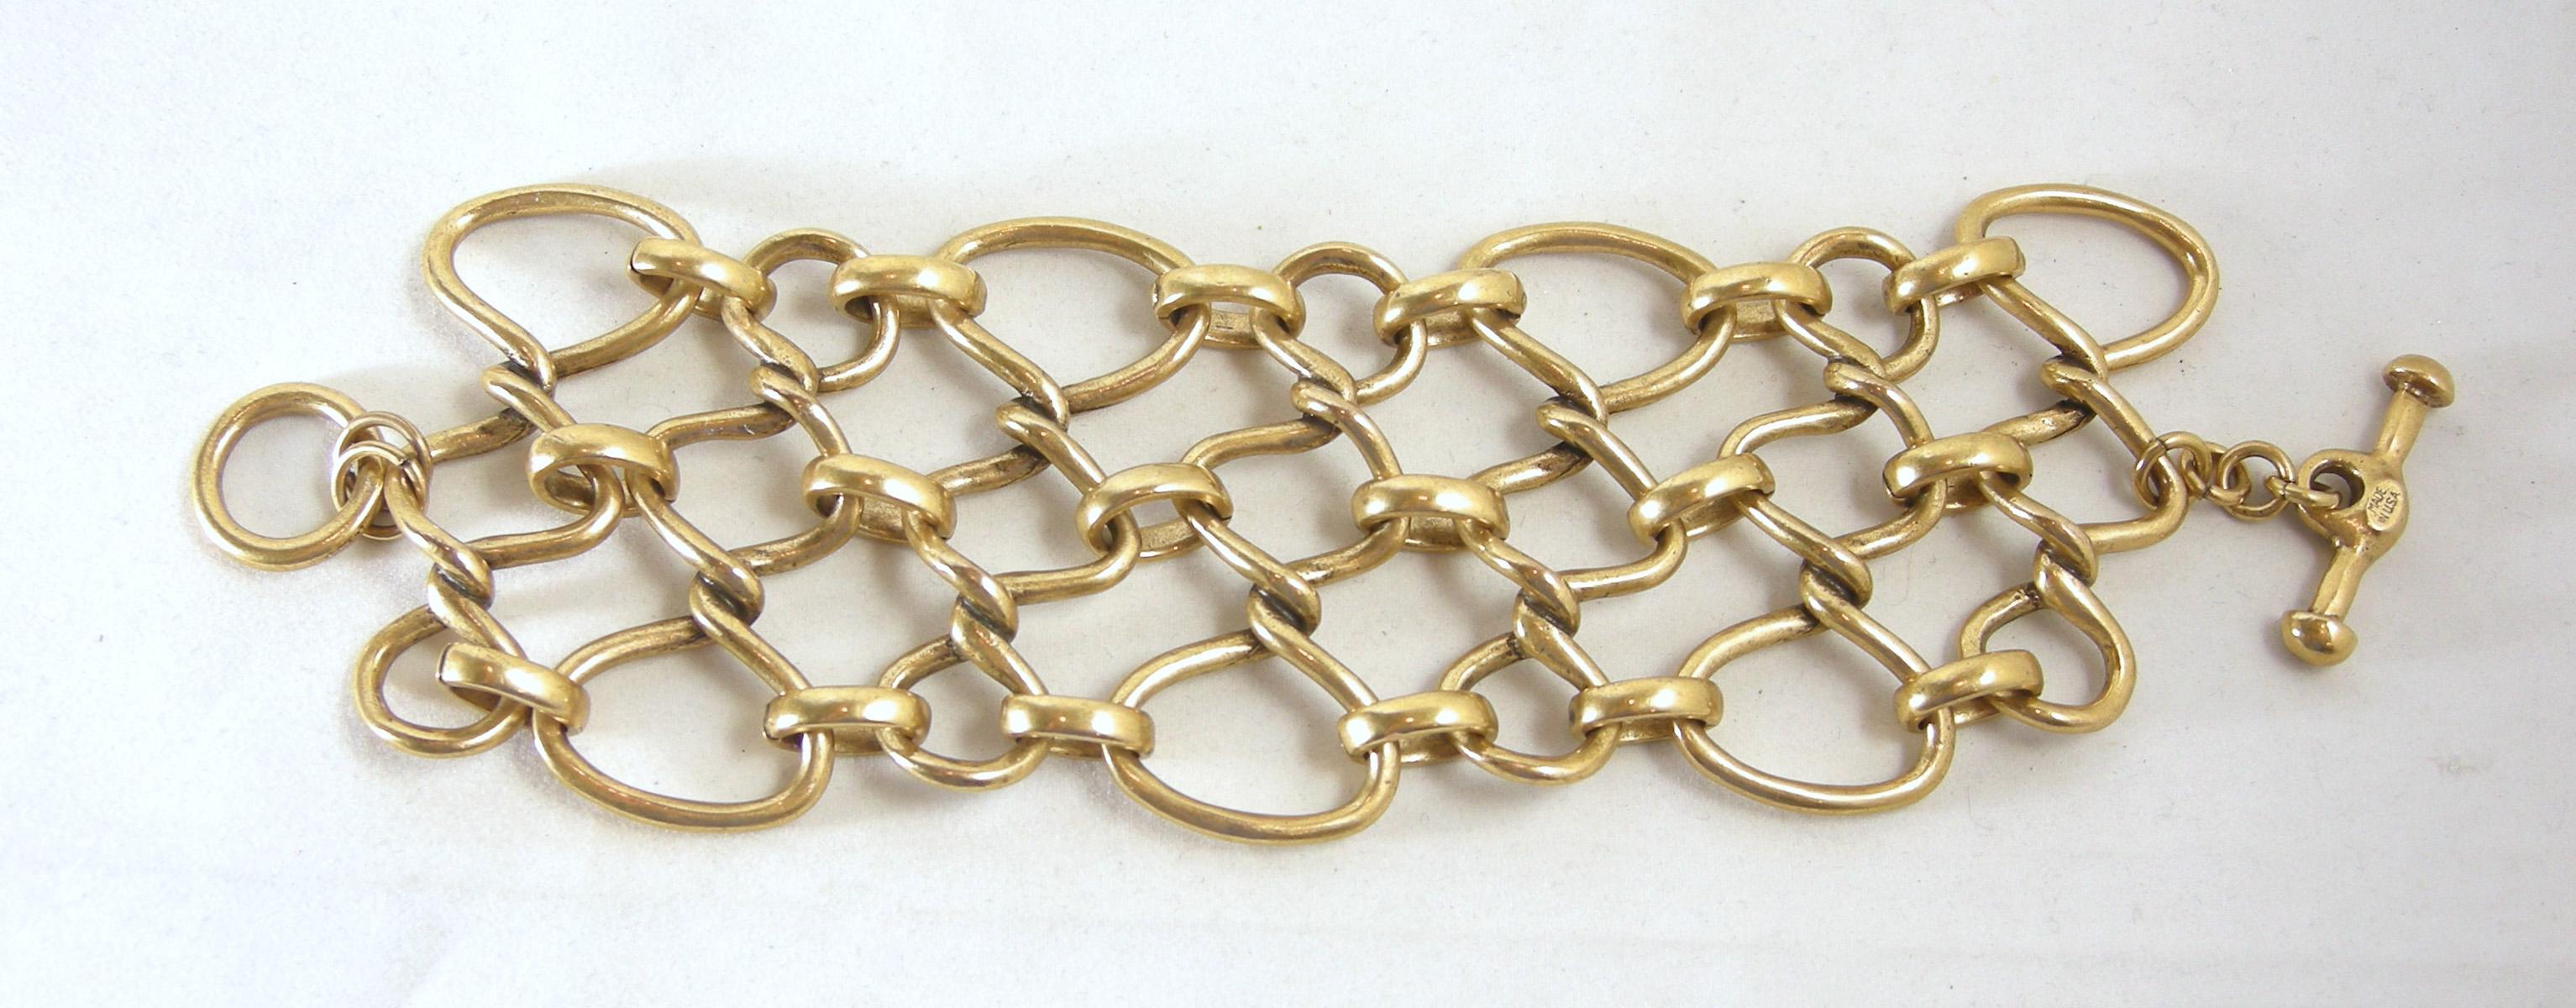 This is a vintage Oscar de la Renta bracelet has a twisted bottleneck chain design in a gold tone finish. It has a toggle clasp that is signed “Oscar de la Renta” and “Made in the USA”.  It measures 7-1/2” long x 3” wide.  It is in excellent